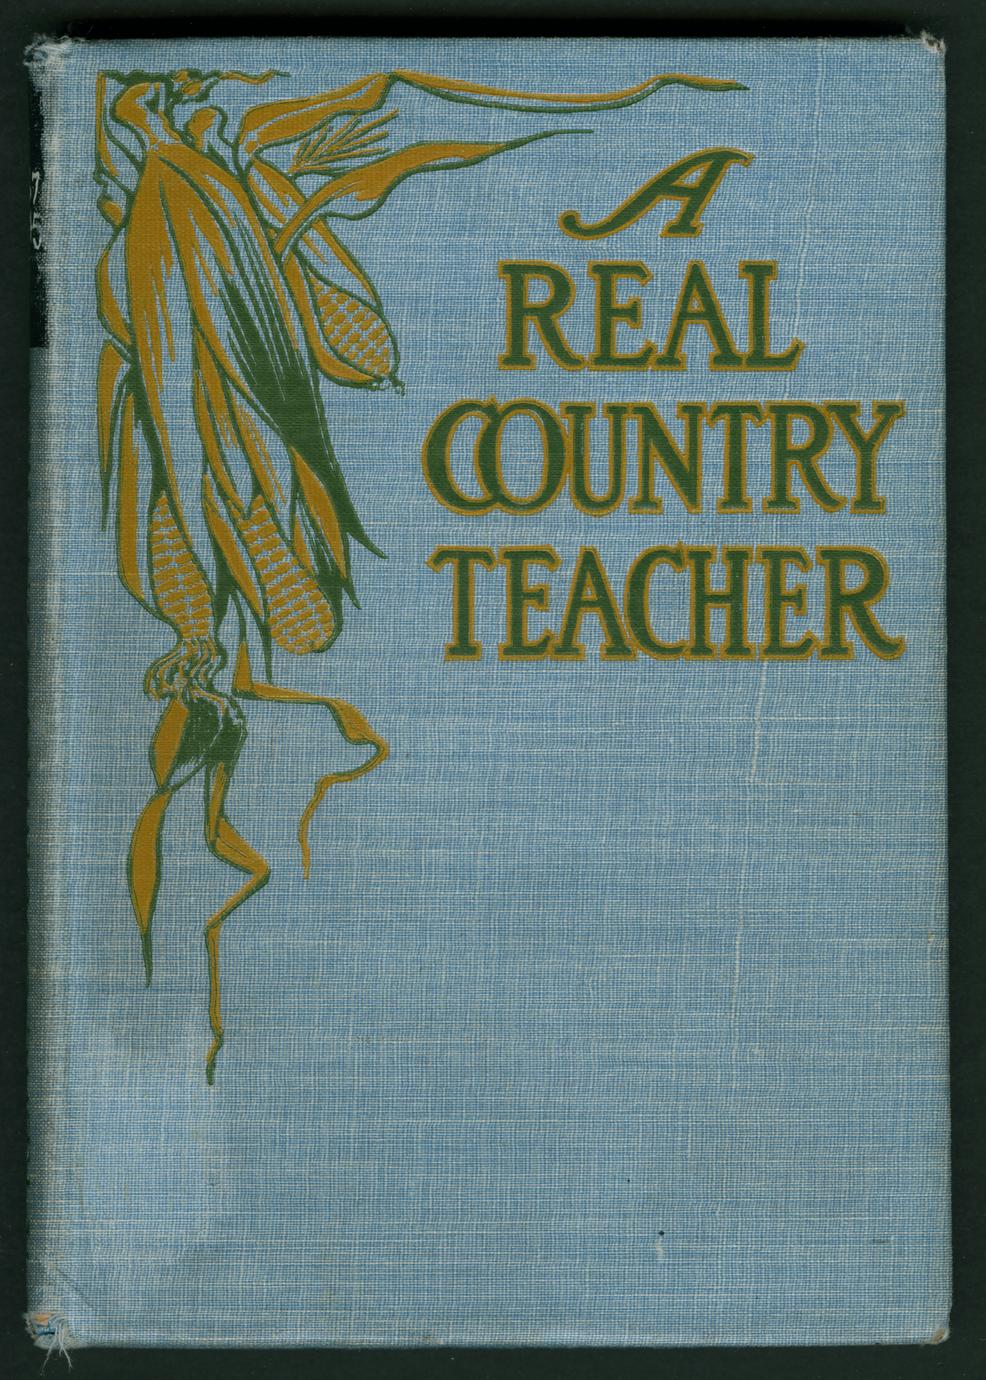 A real country teacher, the story of her work (1 of 2)